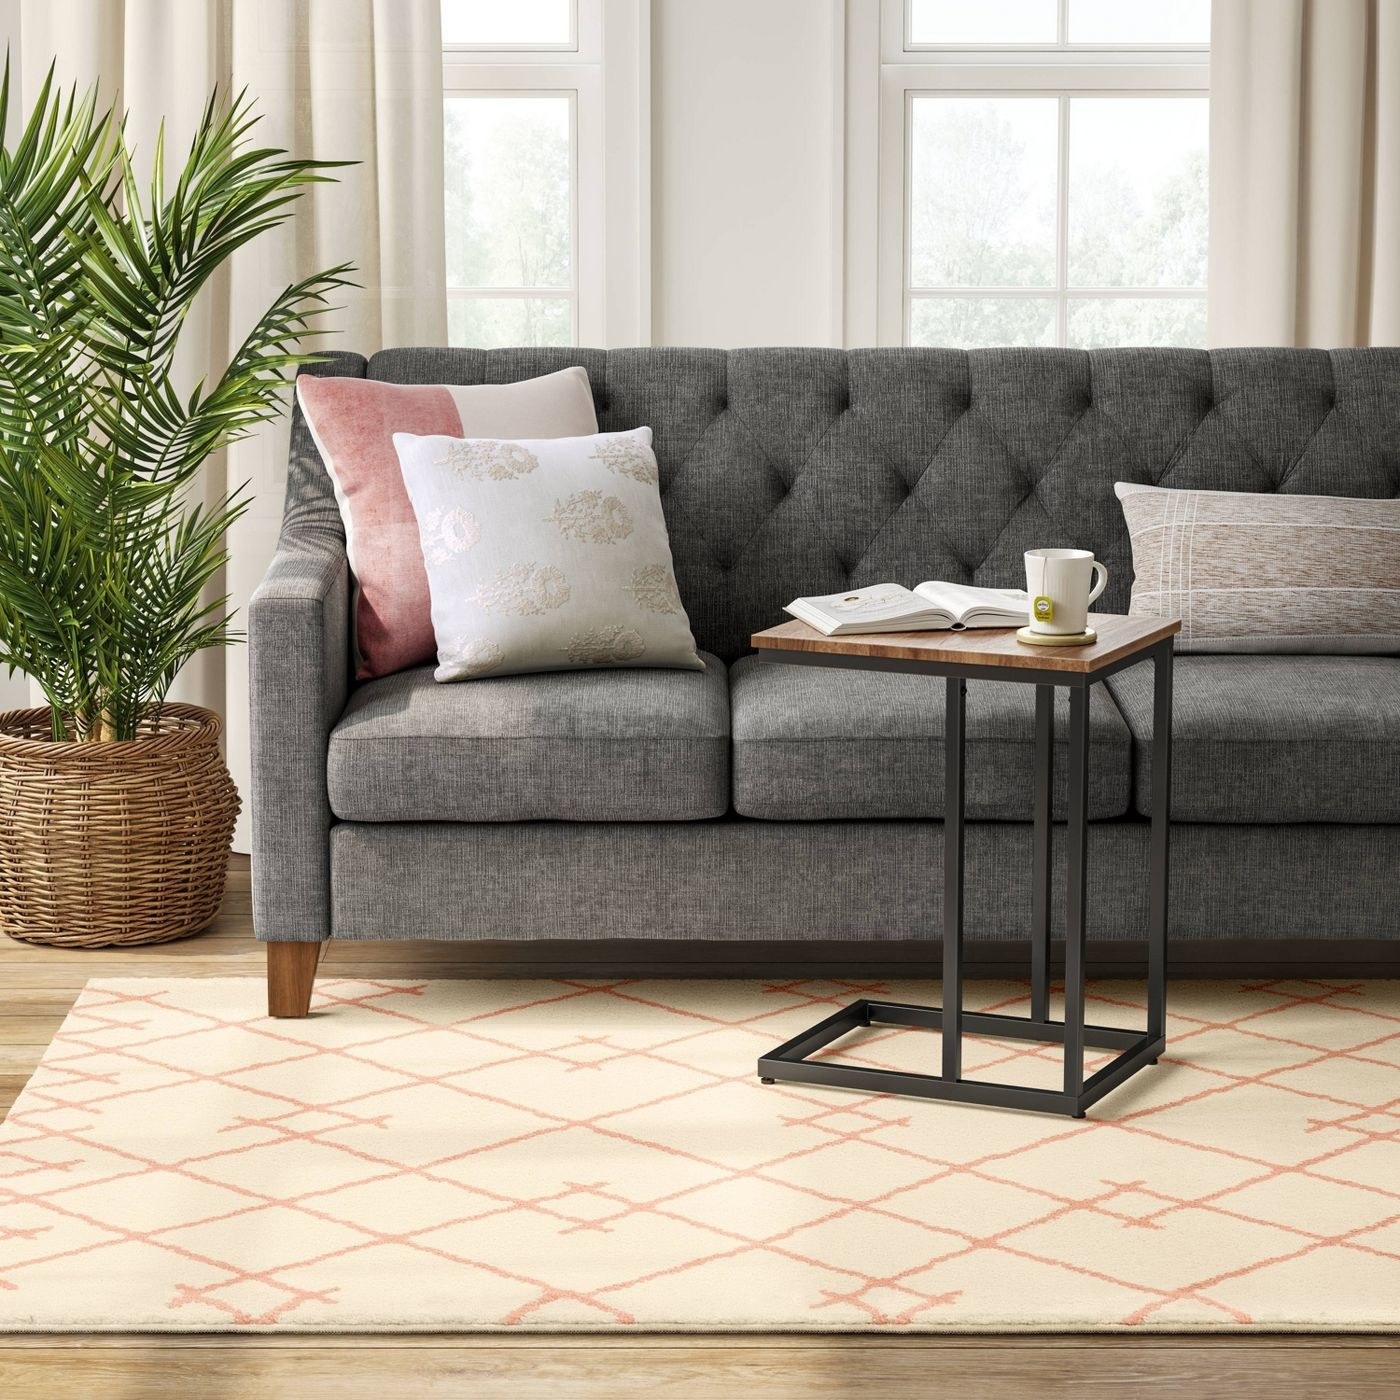 The blush pink tufted floor rug